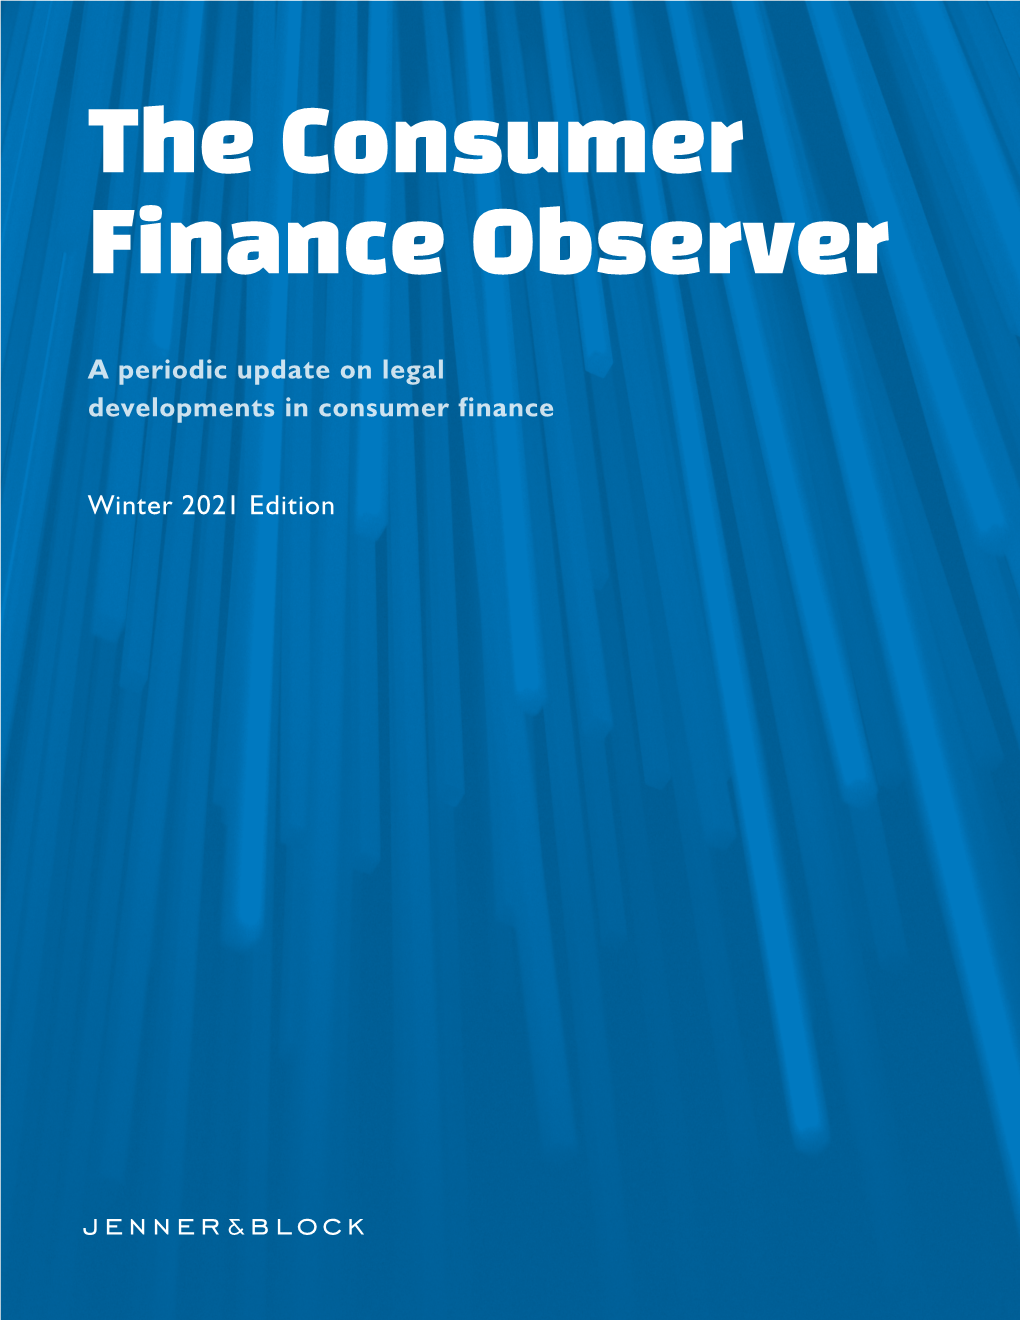 The Consumer Finance Observer – Winter 2021 Edition